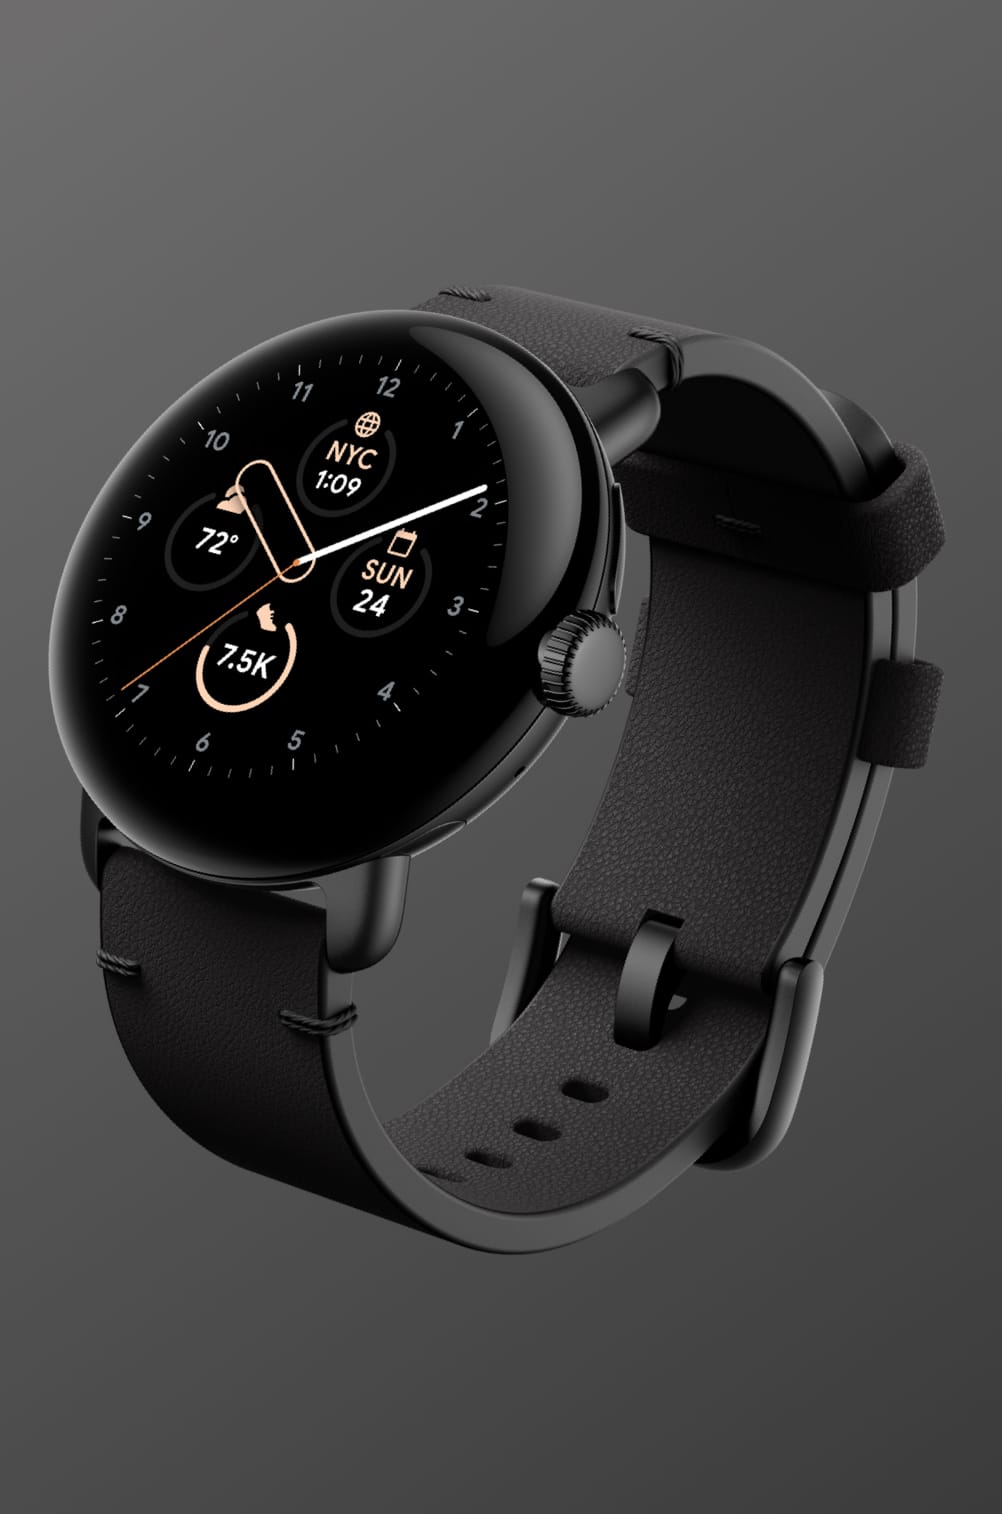 Smartwatch Accessory Google Shop and for Bands Watch 2 Leather Google Accessories Watch Pixel Watch Crafted for Smartwatch Google | Pixel Pixel